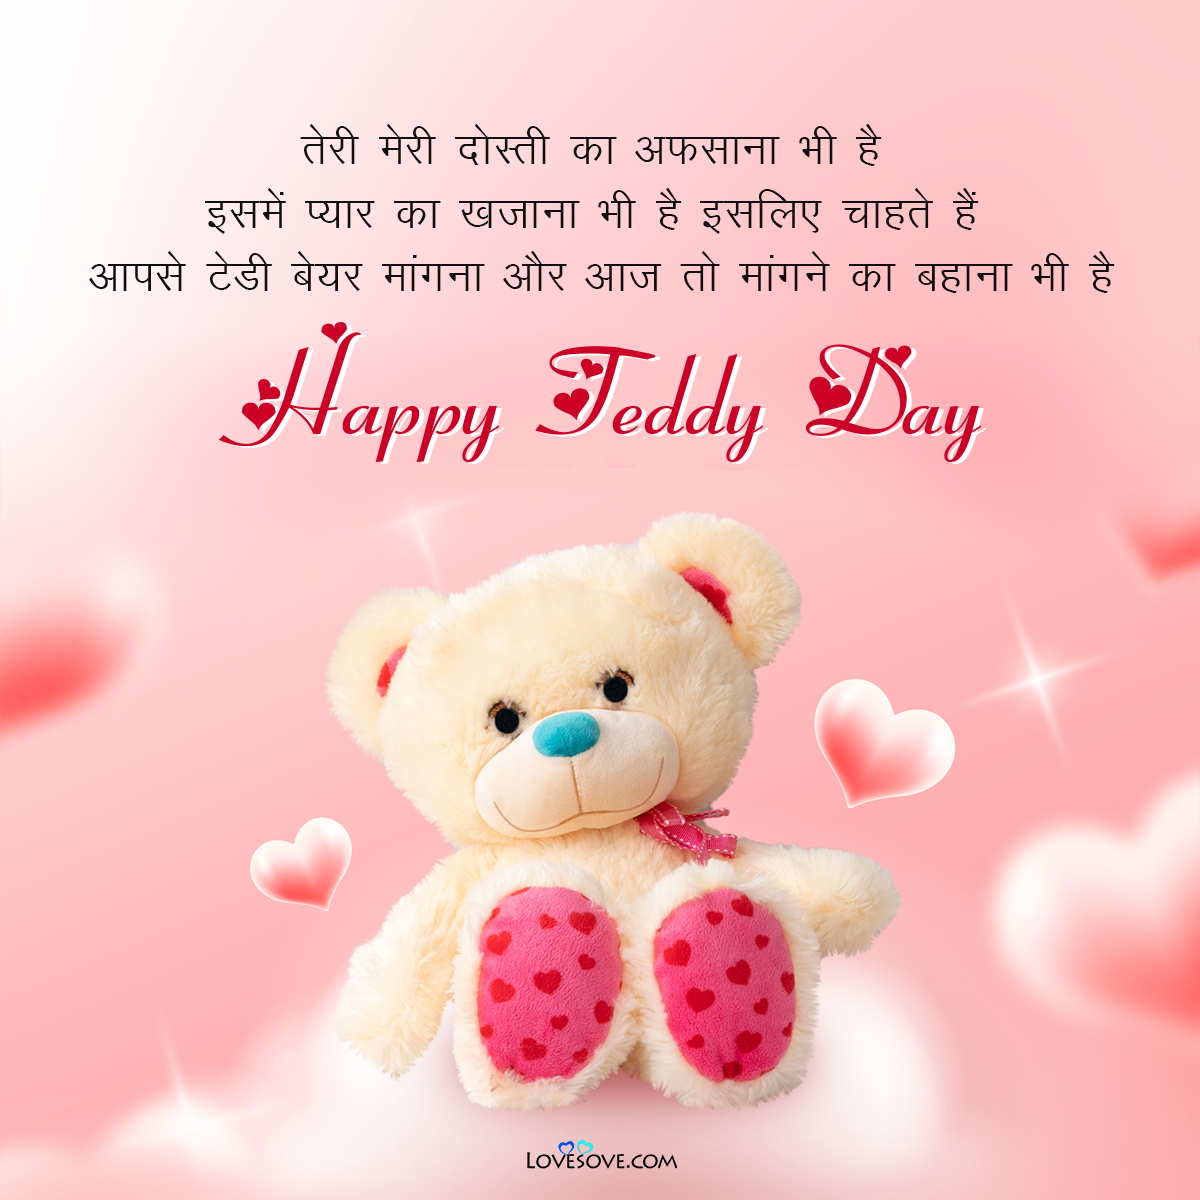 teddy day wishes for wife, teddy day quotes in hindi for girlfriend